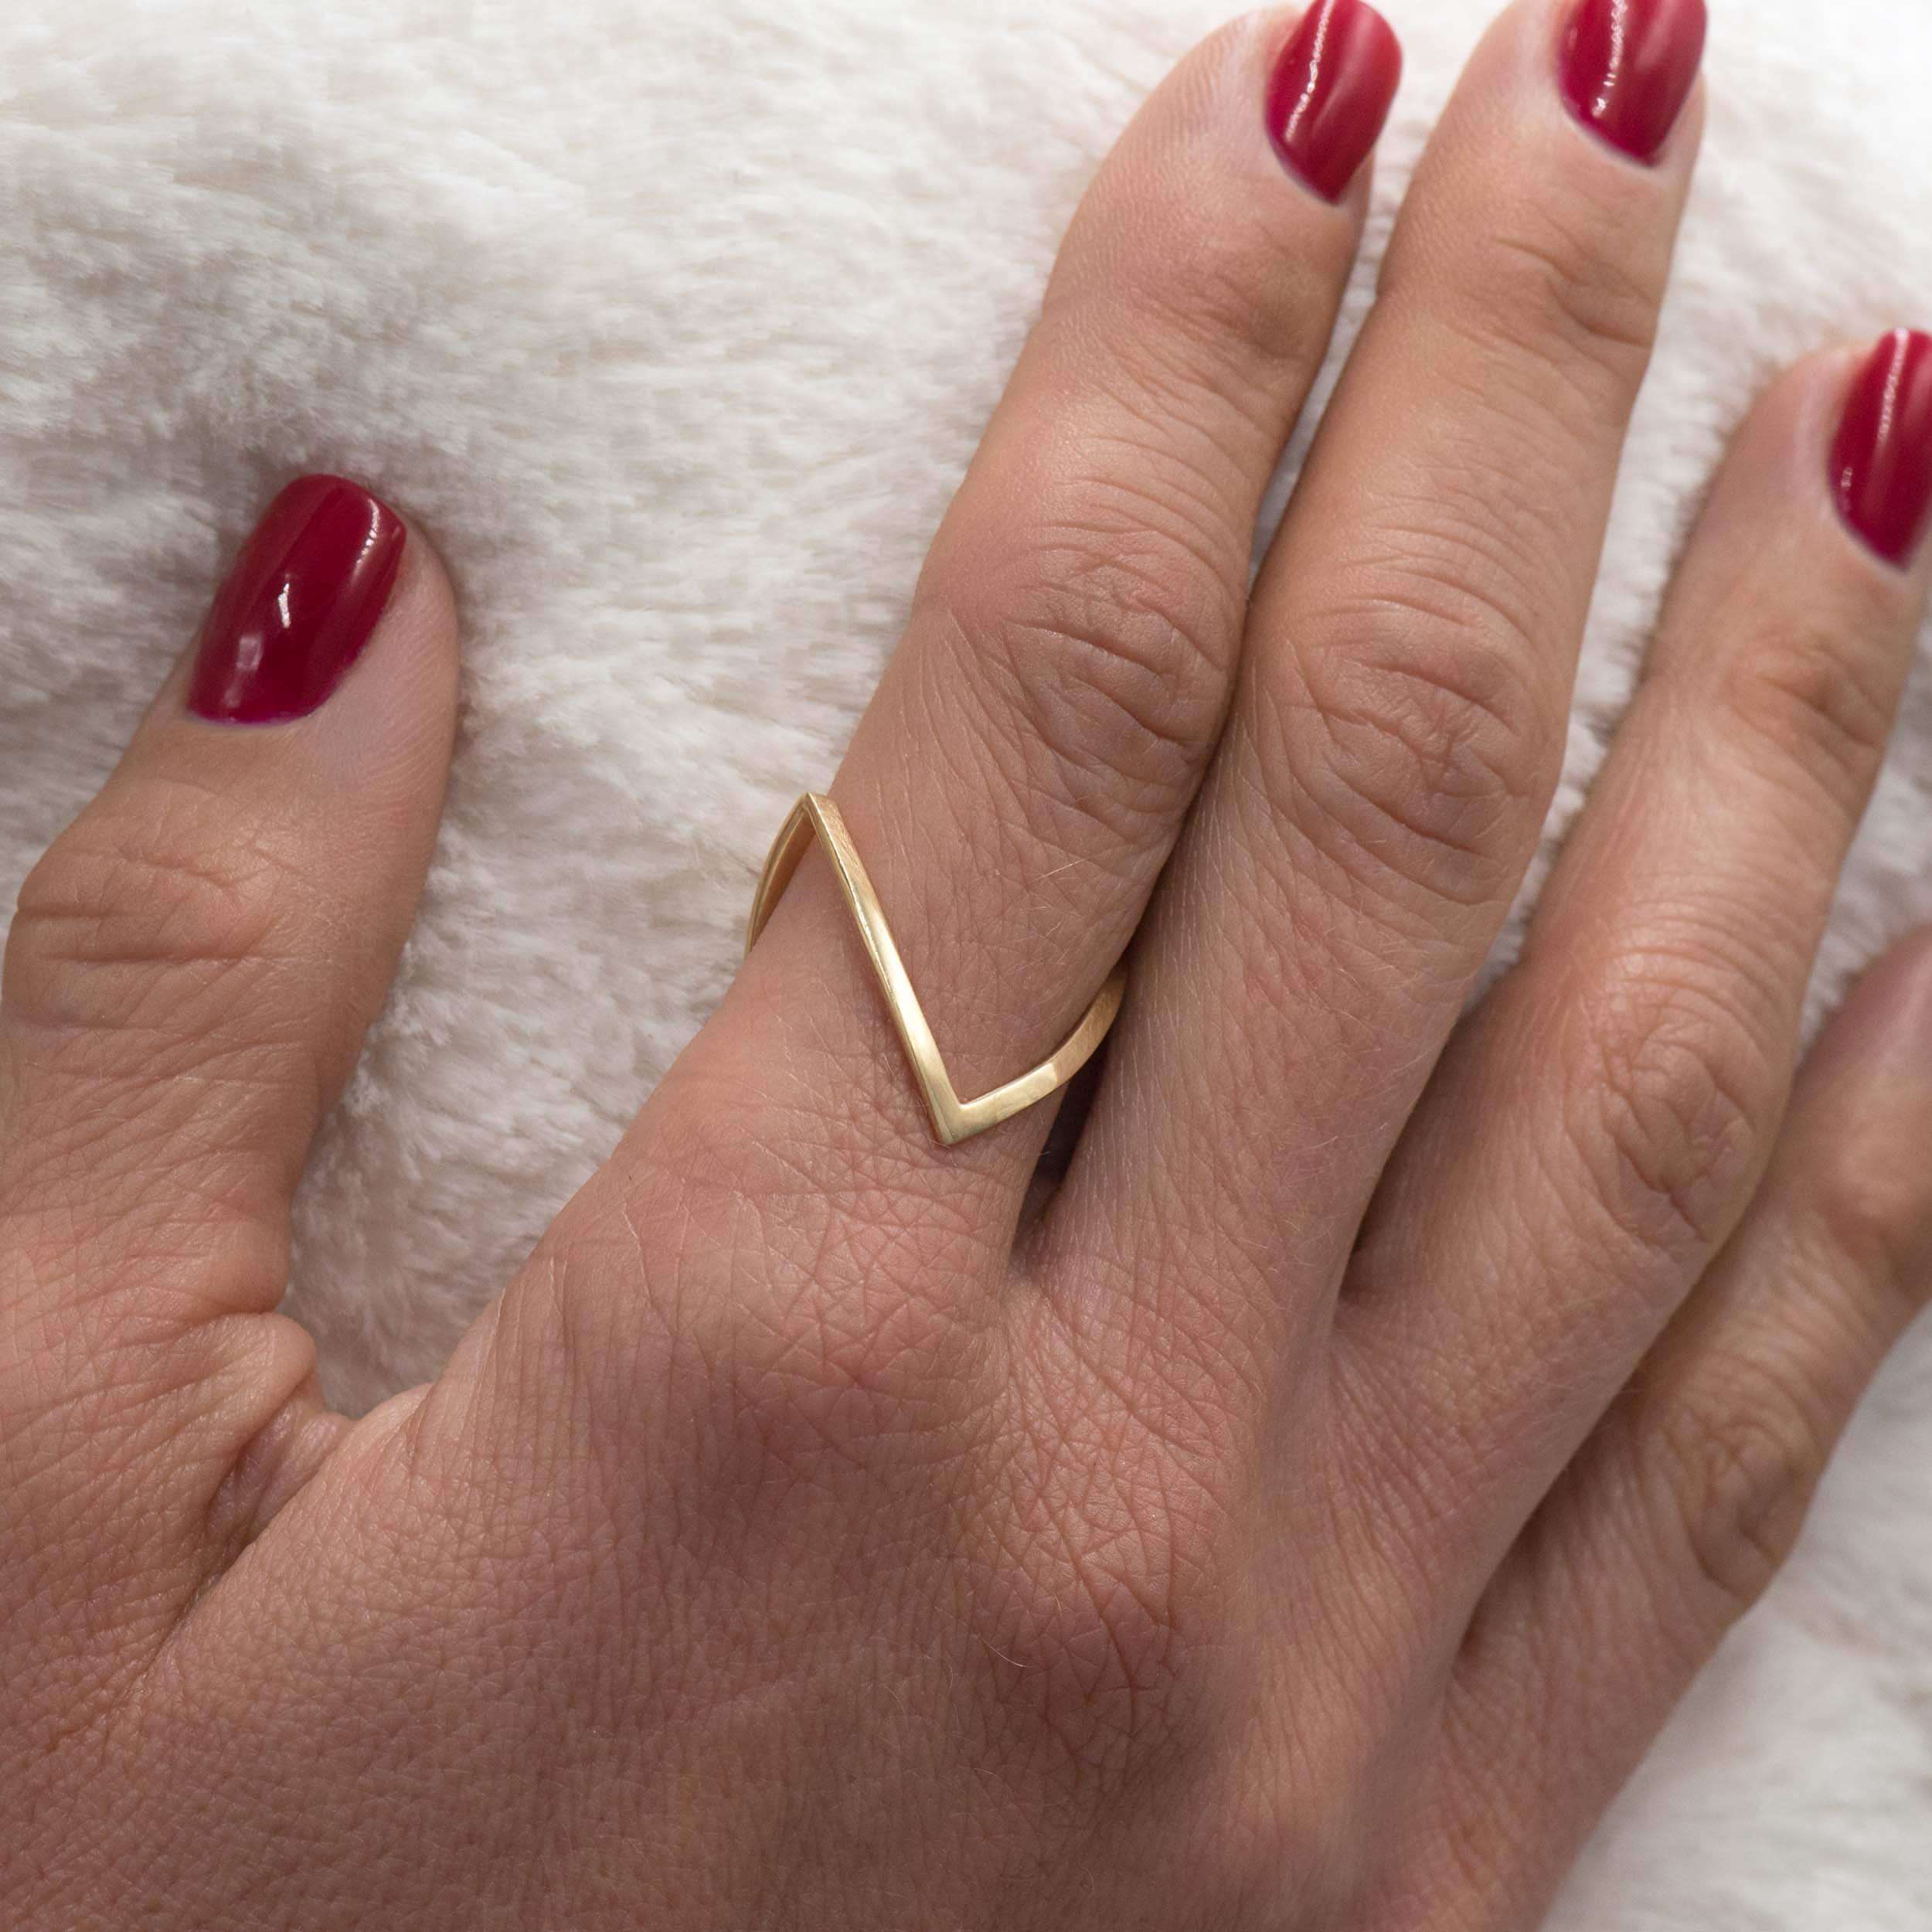 Buy V Shaped Gold Ring Online In India - Etsy India